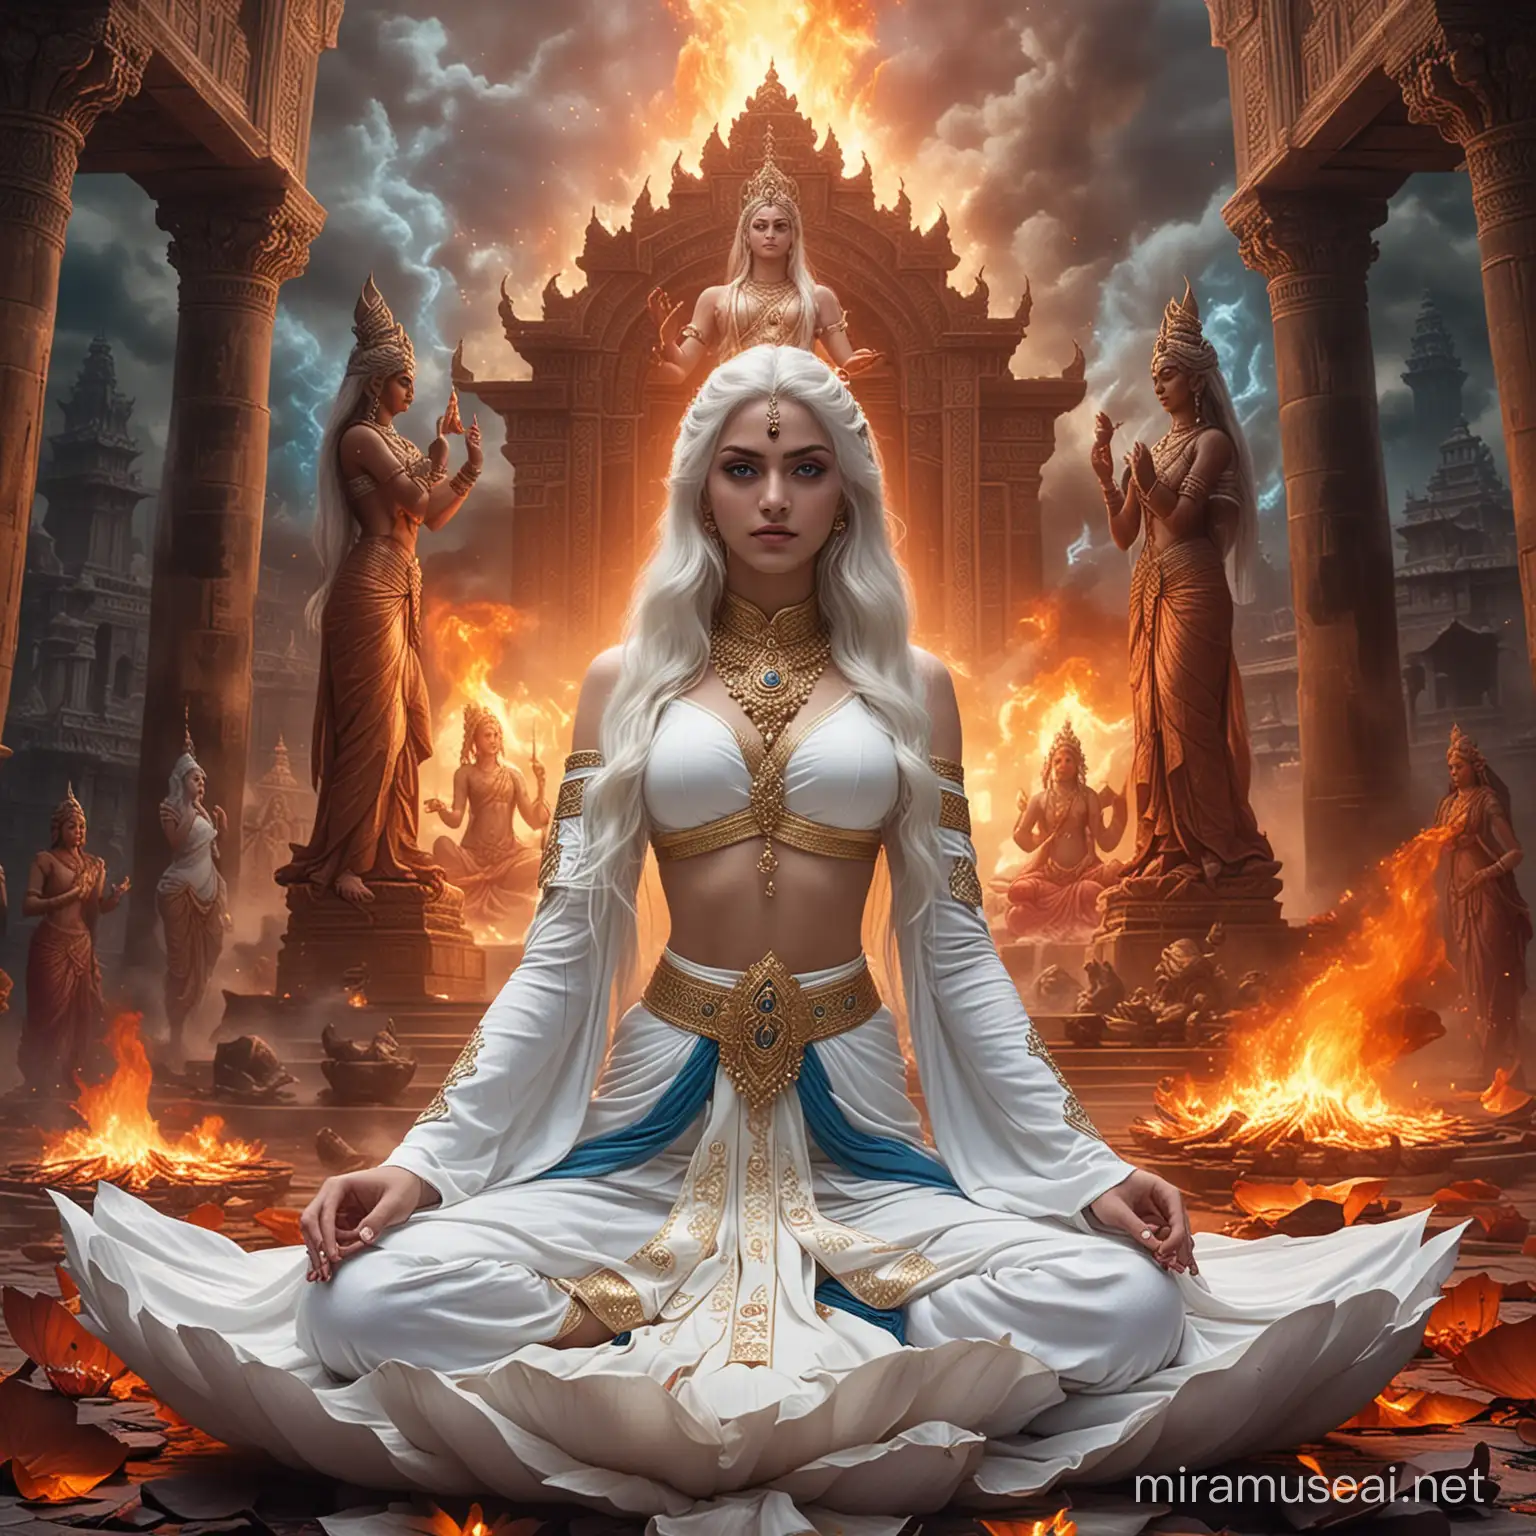 Powerful Hindu Empress Goddess Surrounded by Fire and Divine Beings